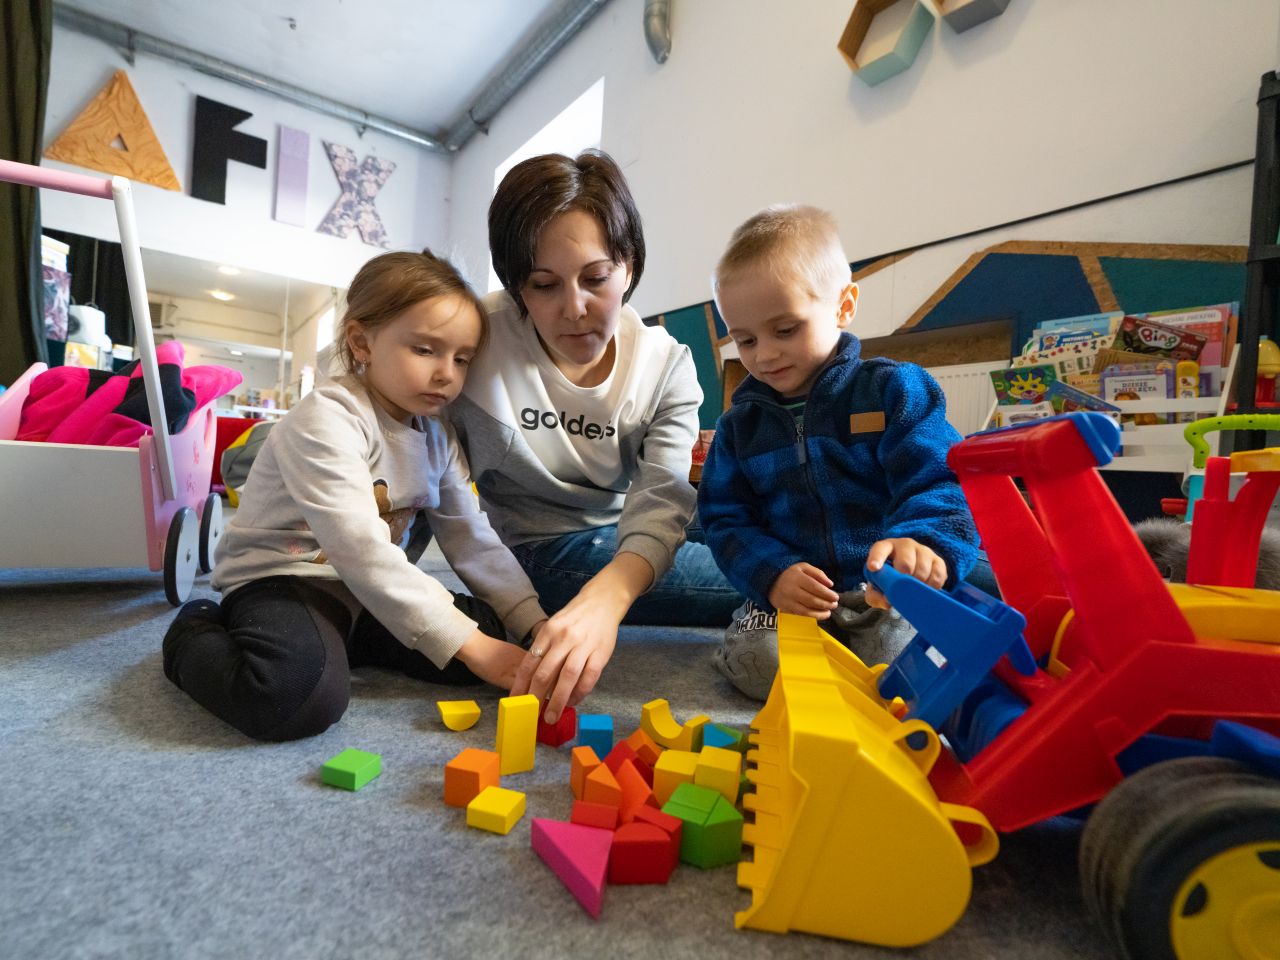 A mother and her children play together in a safe space operated by the Jewish Community Center of Krakow